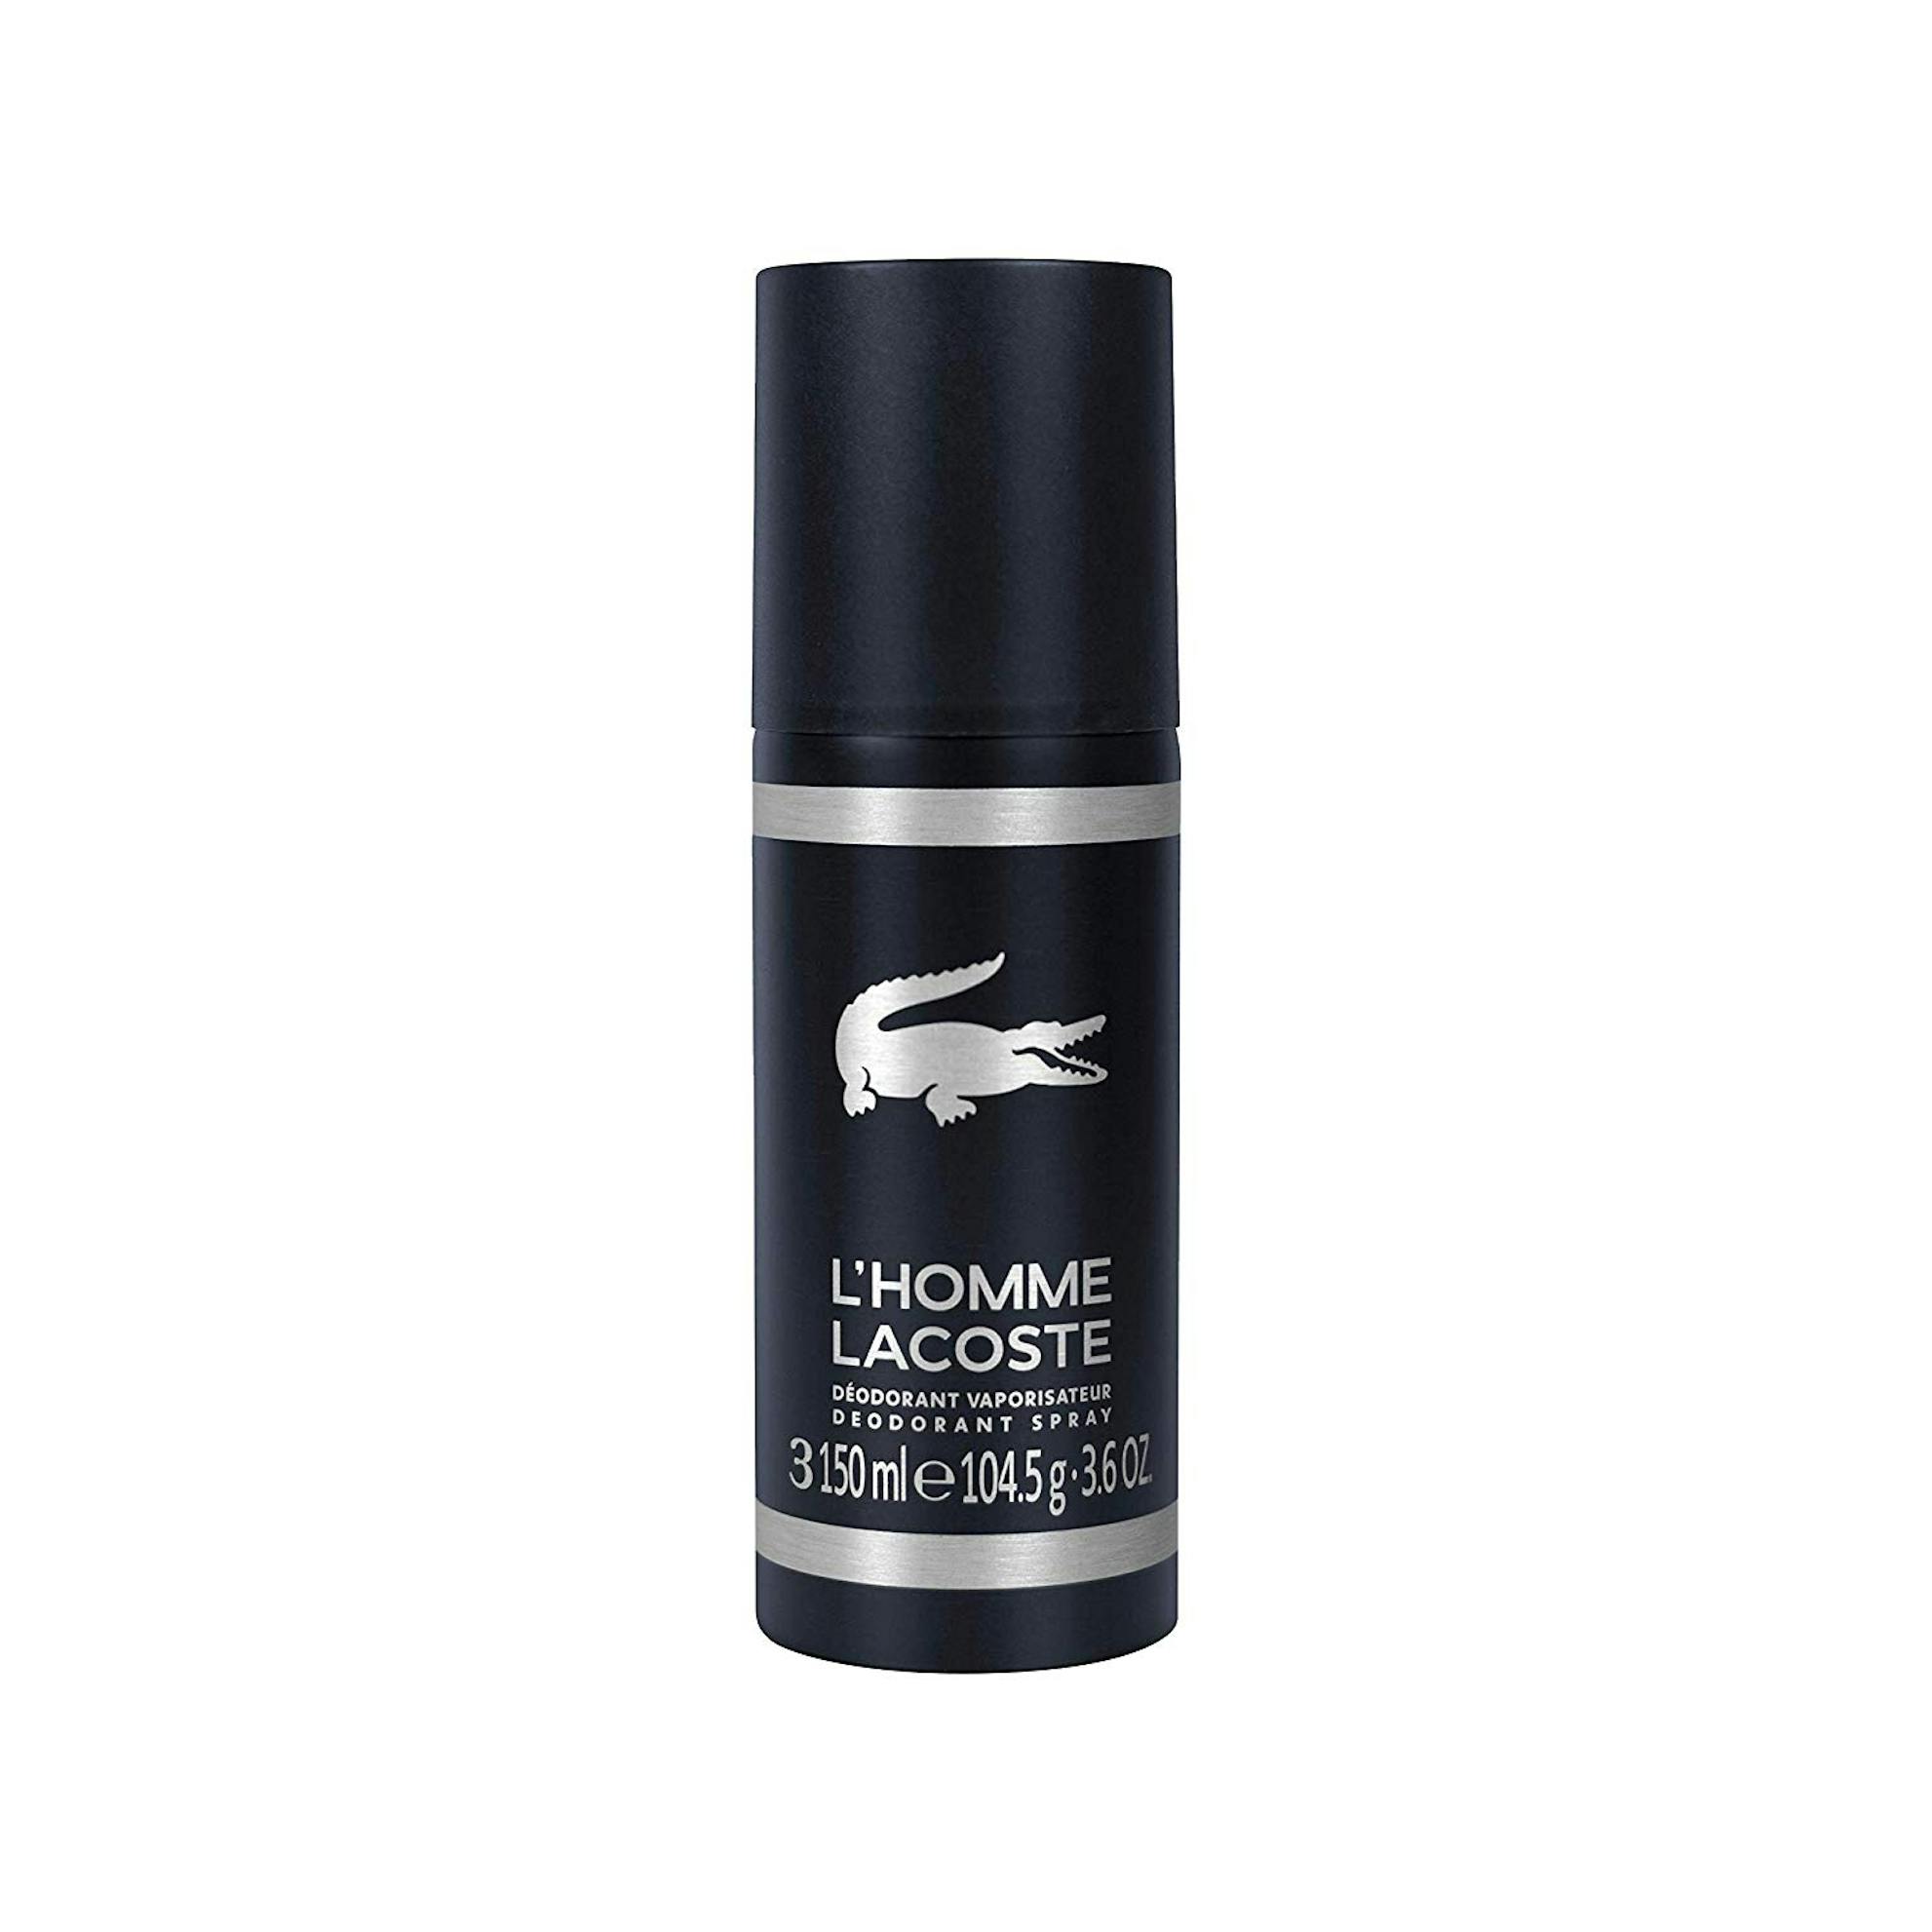 L'Homme Deodorant 150ml | The Fragrance Shop | The Shop